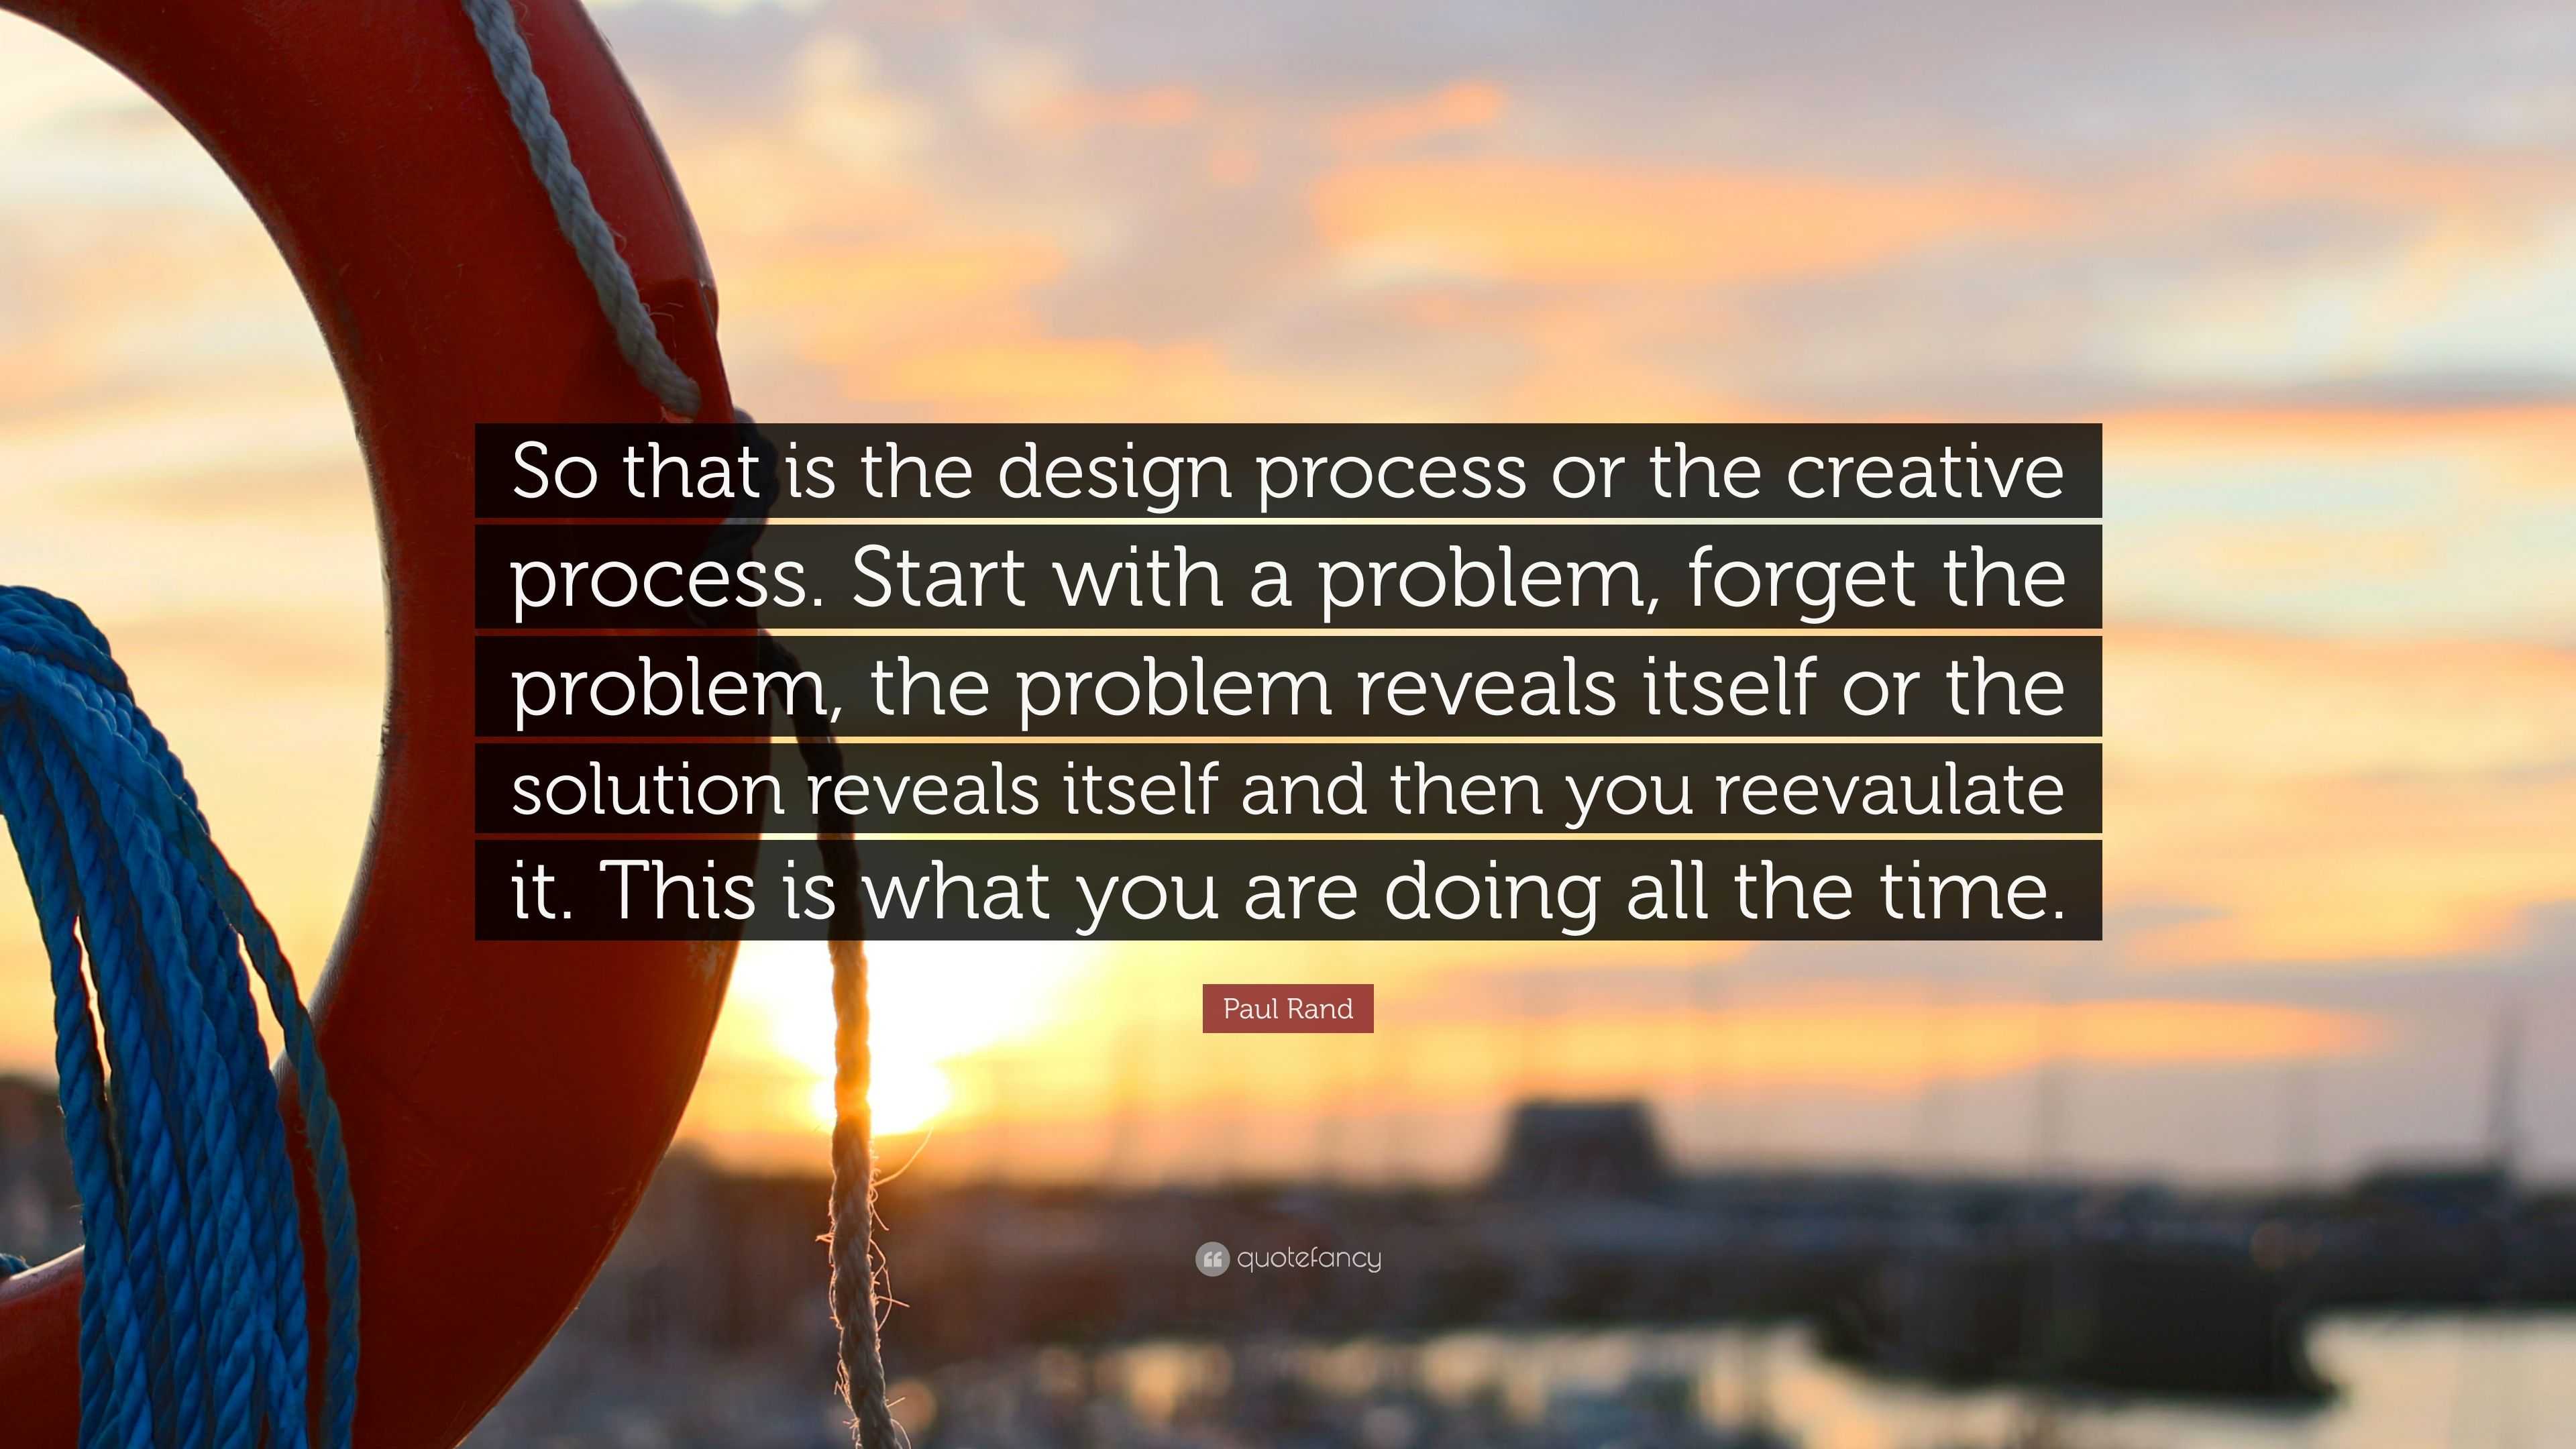 Paul Rand Quote: “So that is the design process or the creative process